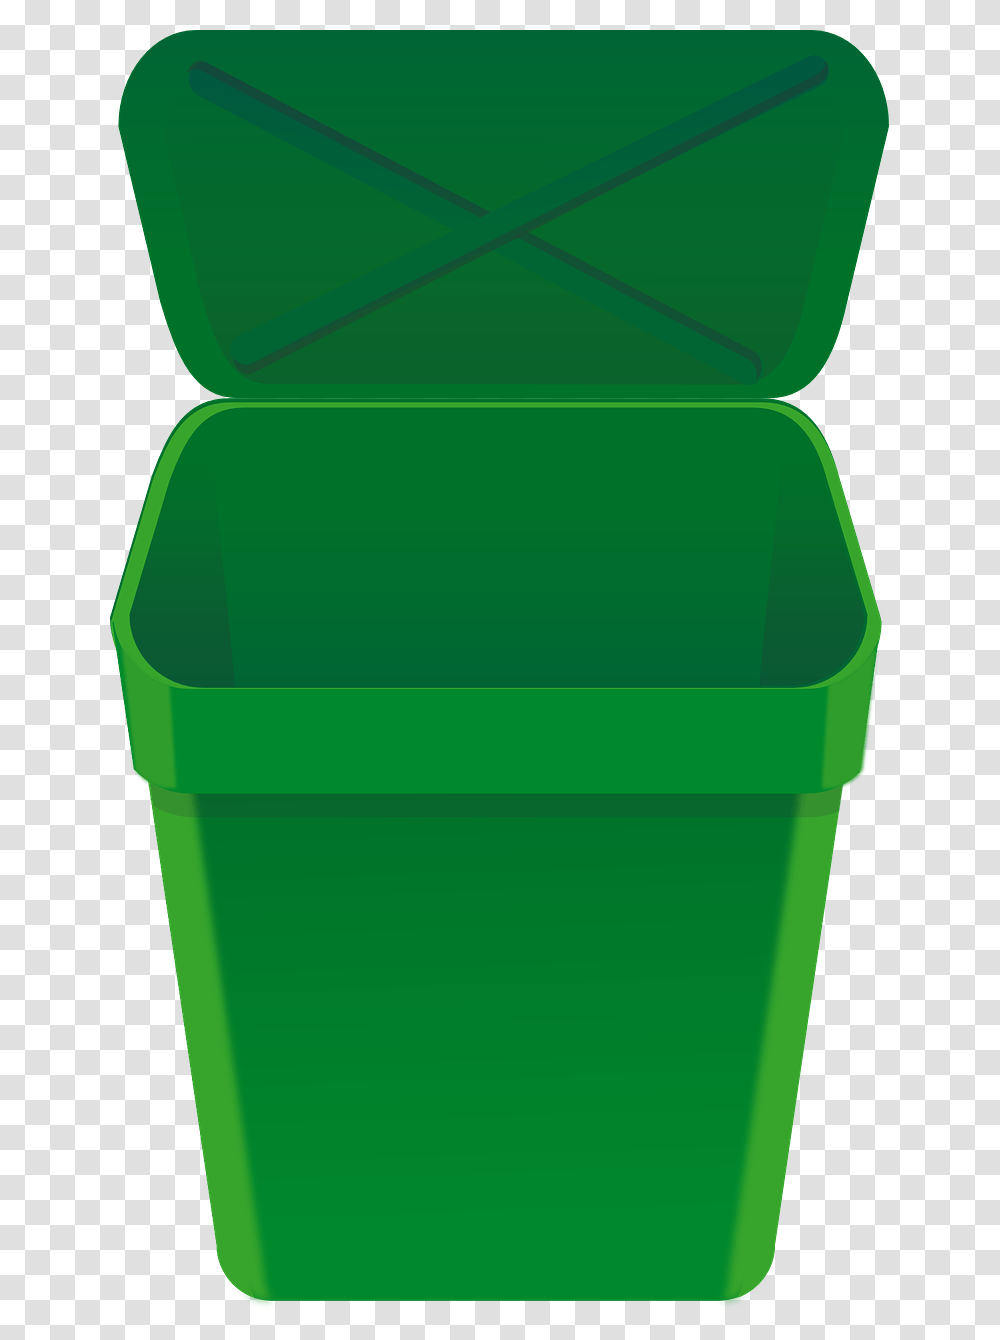 Download Green Trash Can Clipart Rubbish Bins Waste Paper, Tin, Plastic, Recycling Symbol Transparent Png